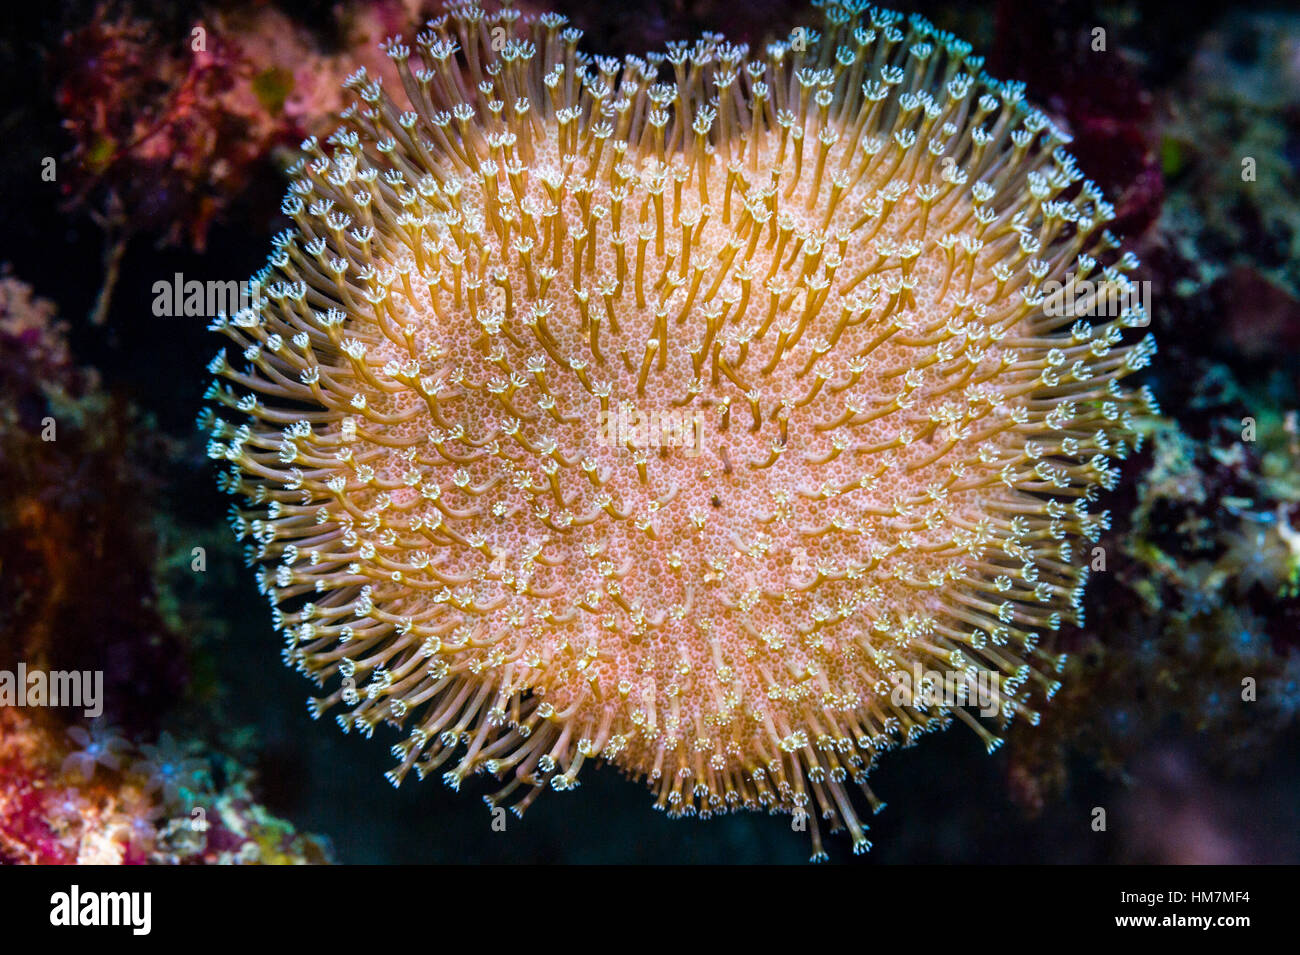 The feeding polyps of a small Elephant Ear soft coral on a reef. Stock Photo